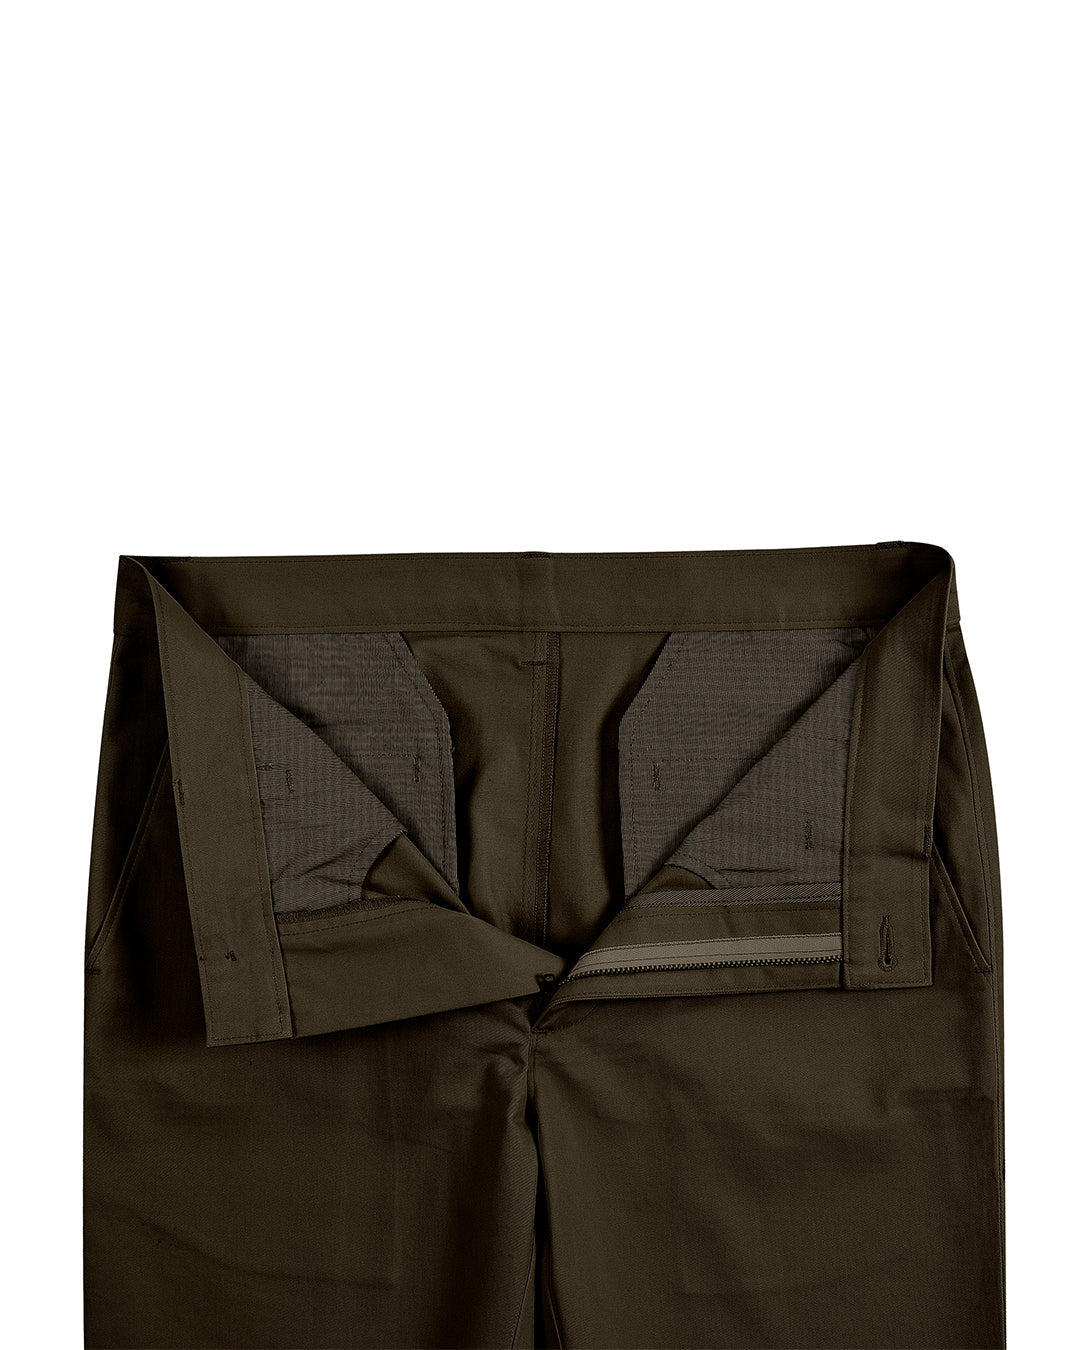 Open front view of custom Genoa Chino pants for men by Luxire in choco brown